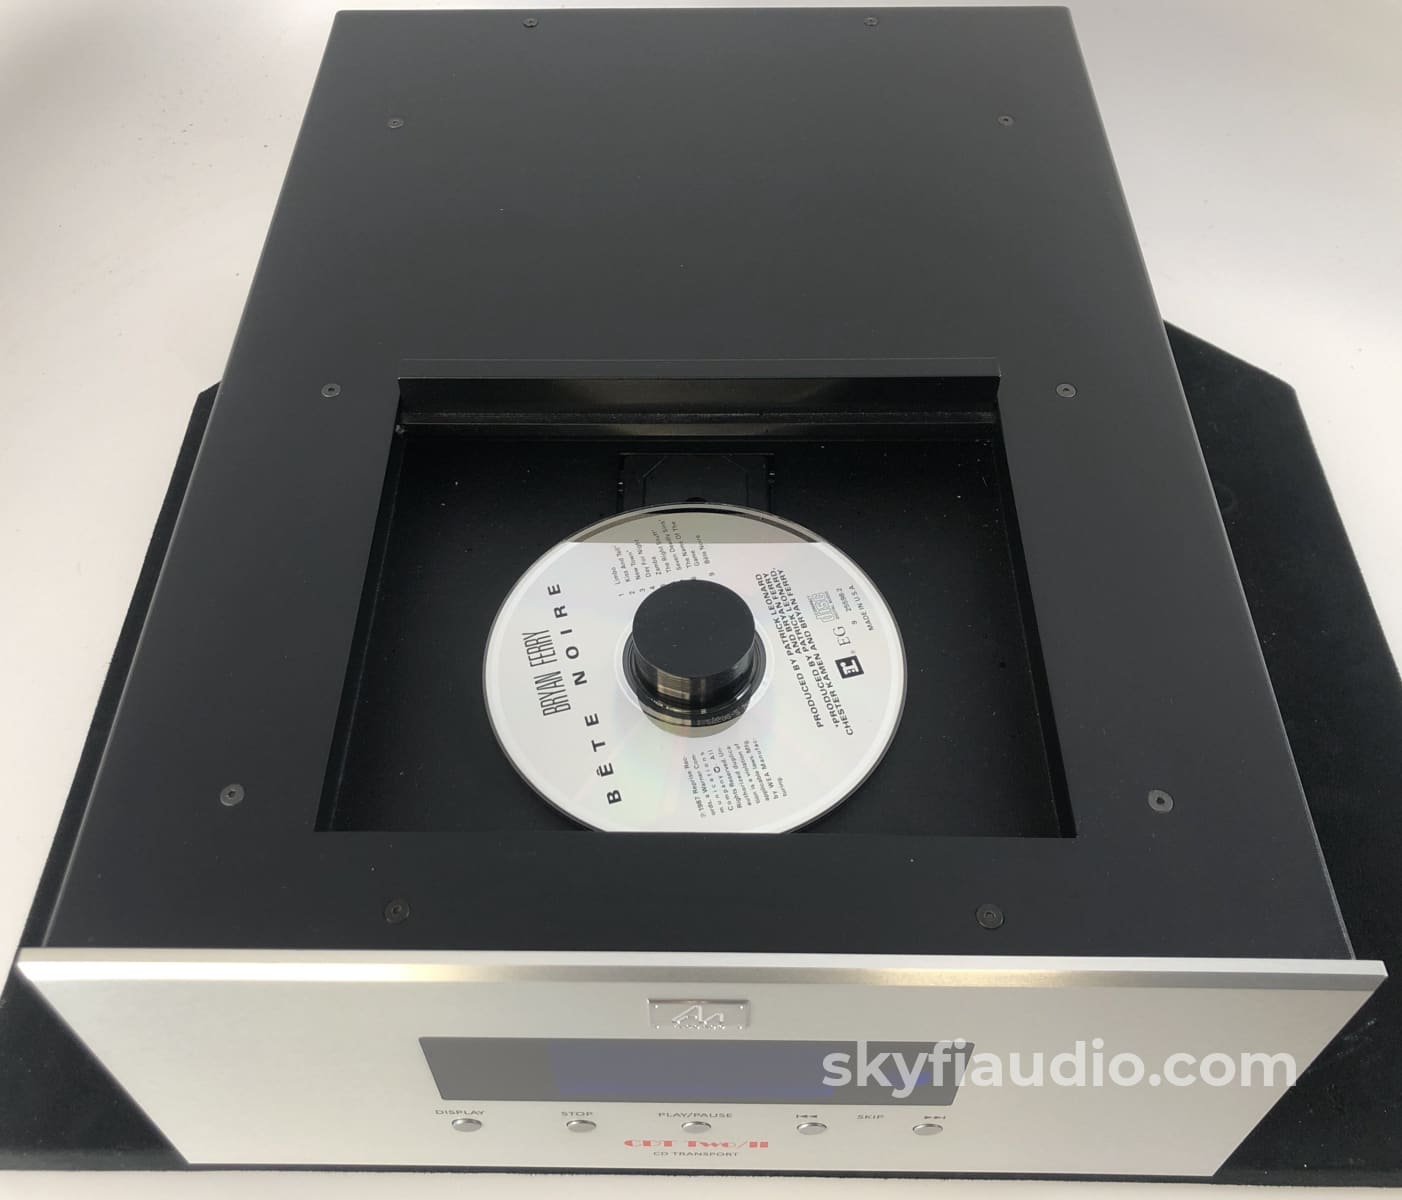 Audio Note Cdt Two/Ii Cd Transport - Top Loading! Complete With Box Remote And Manual + Digital